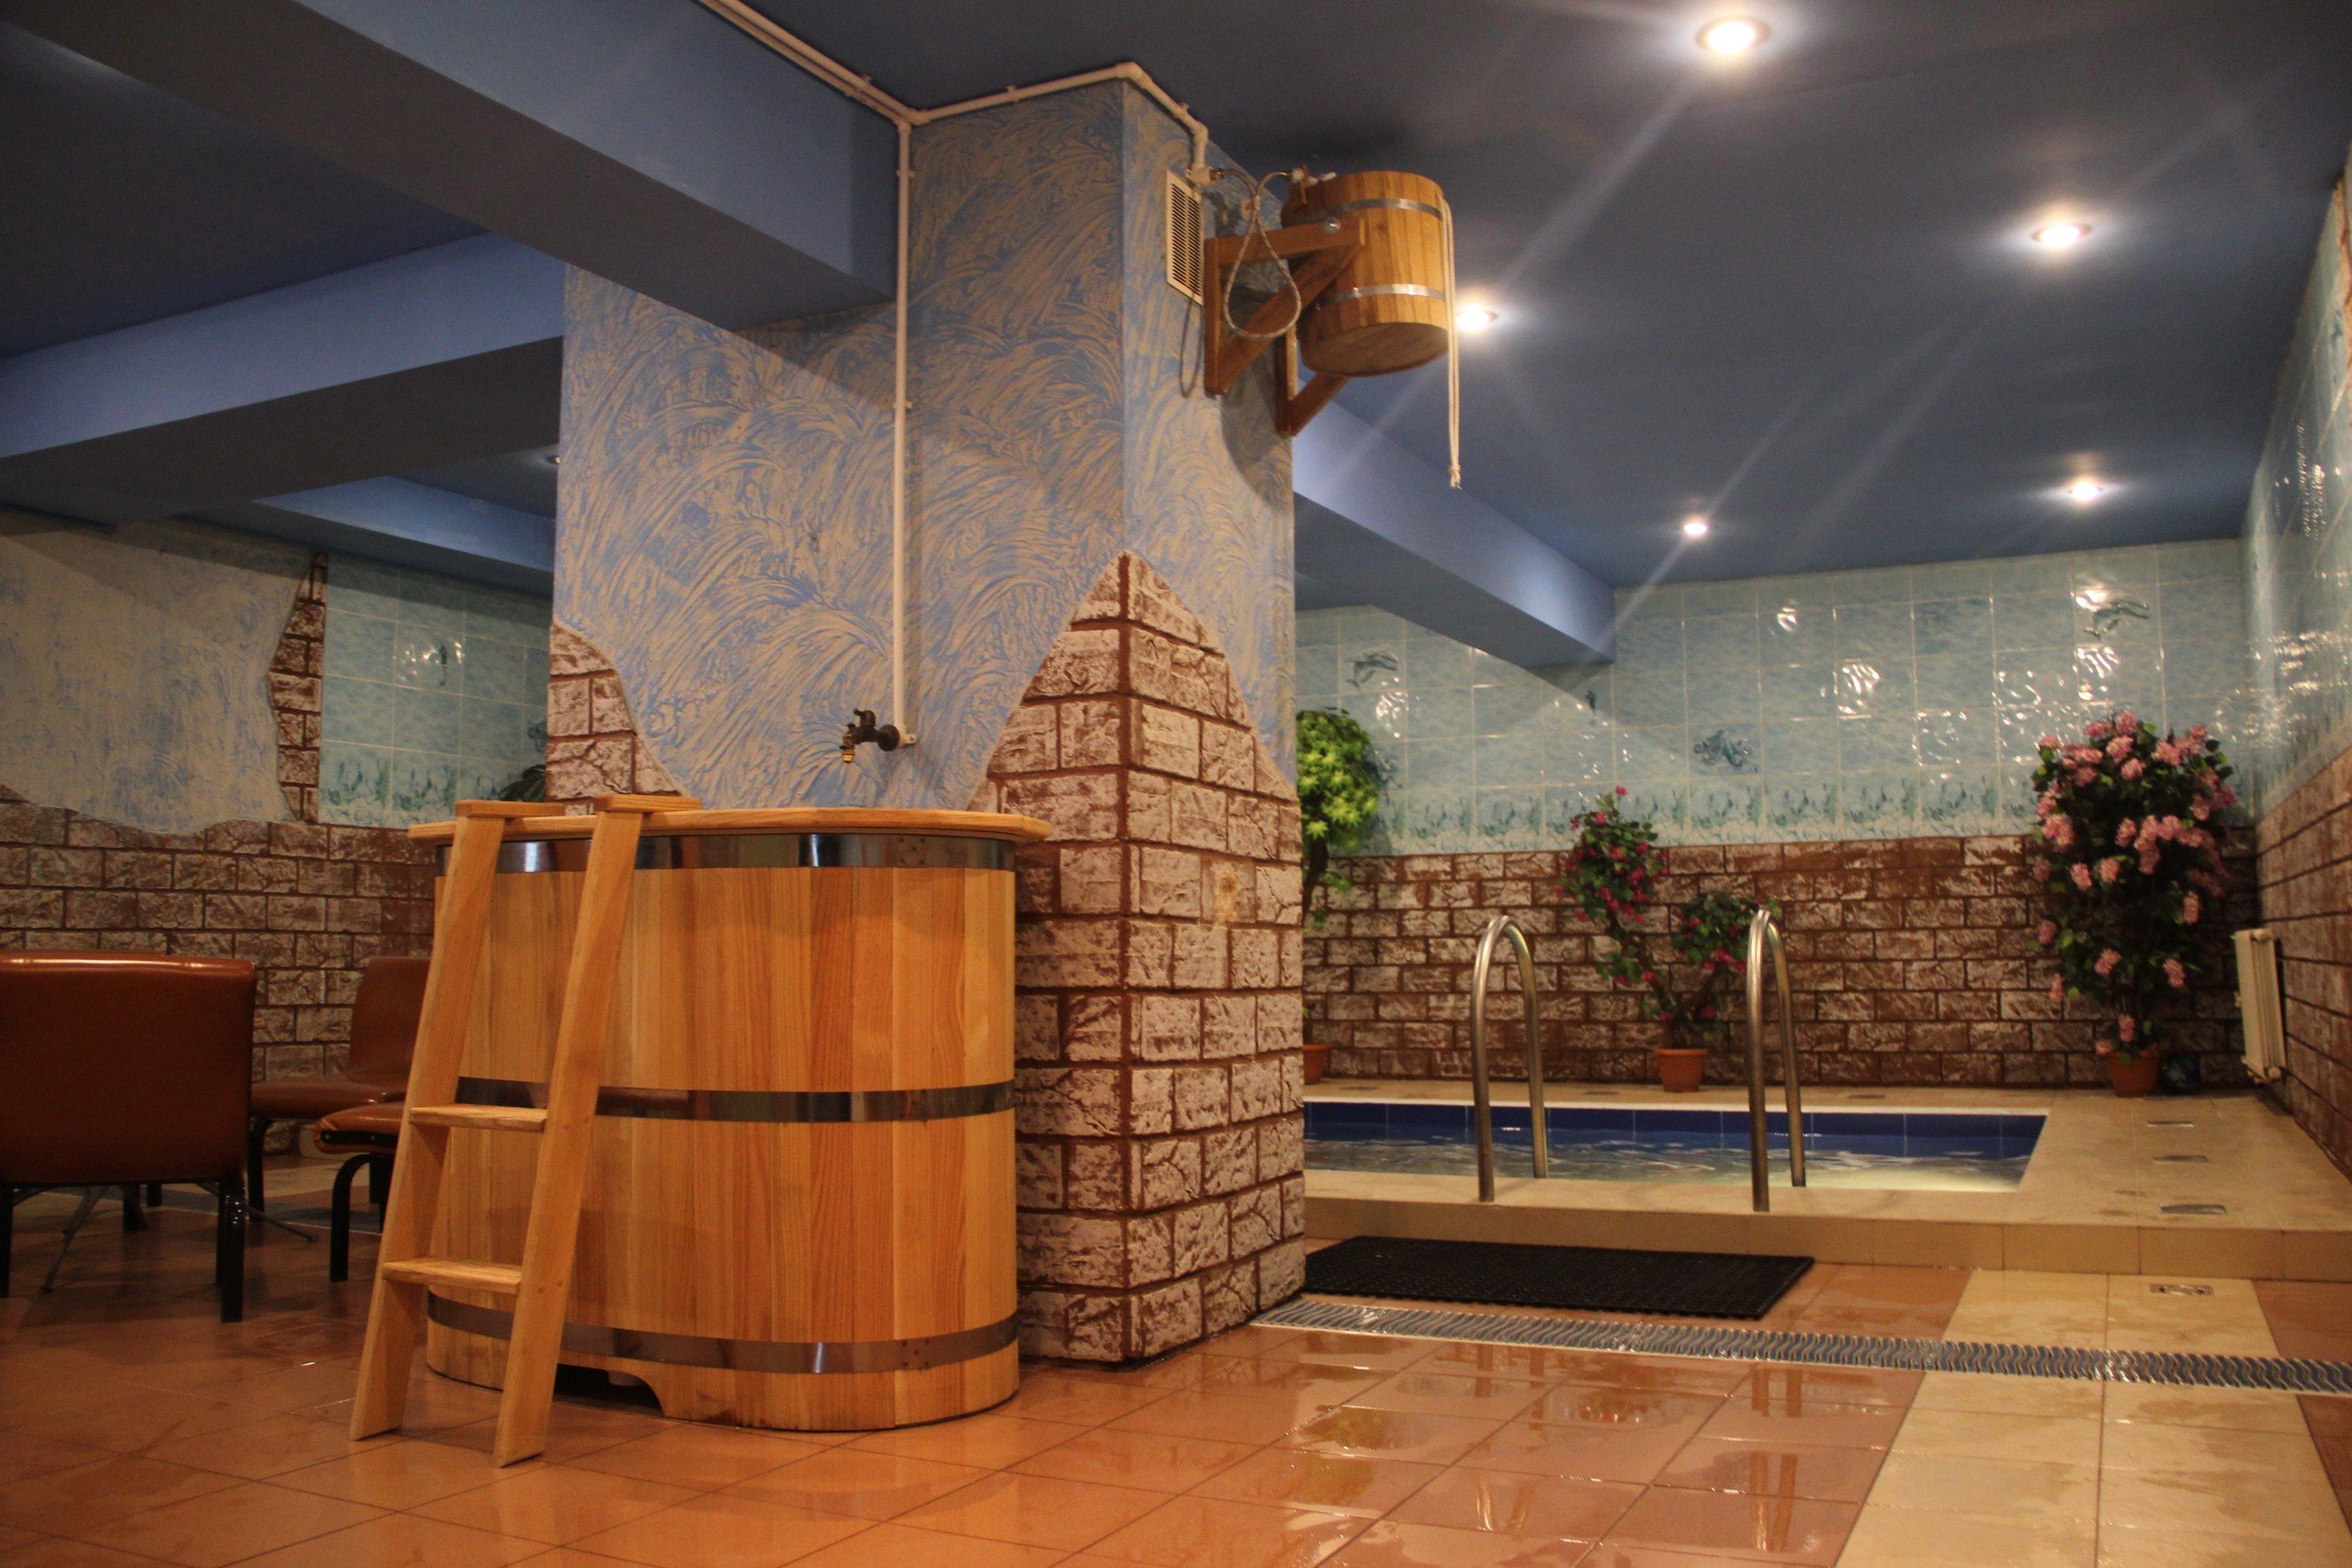 The best baths and saunas of St. Petersburg in 2020